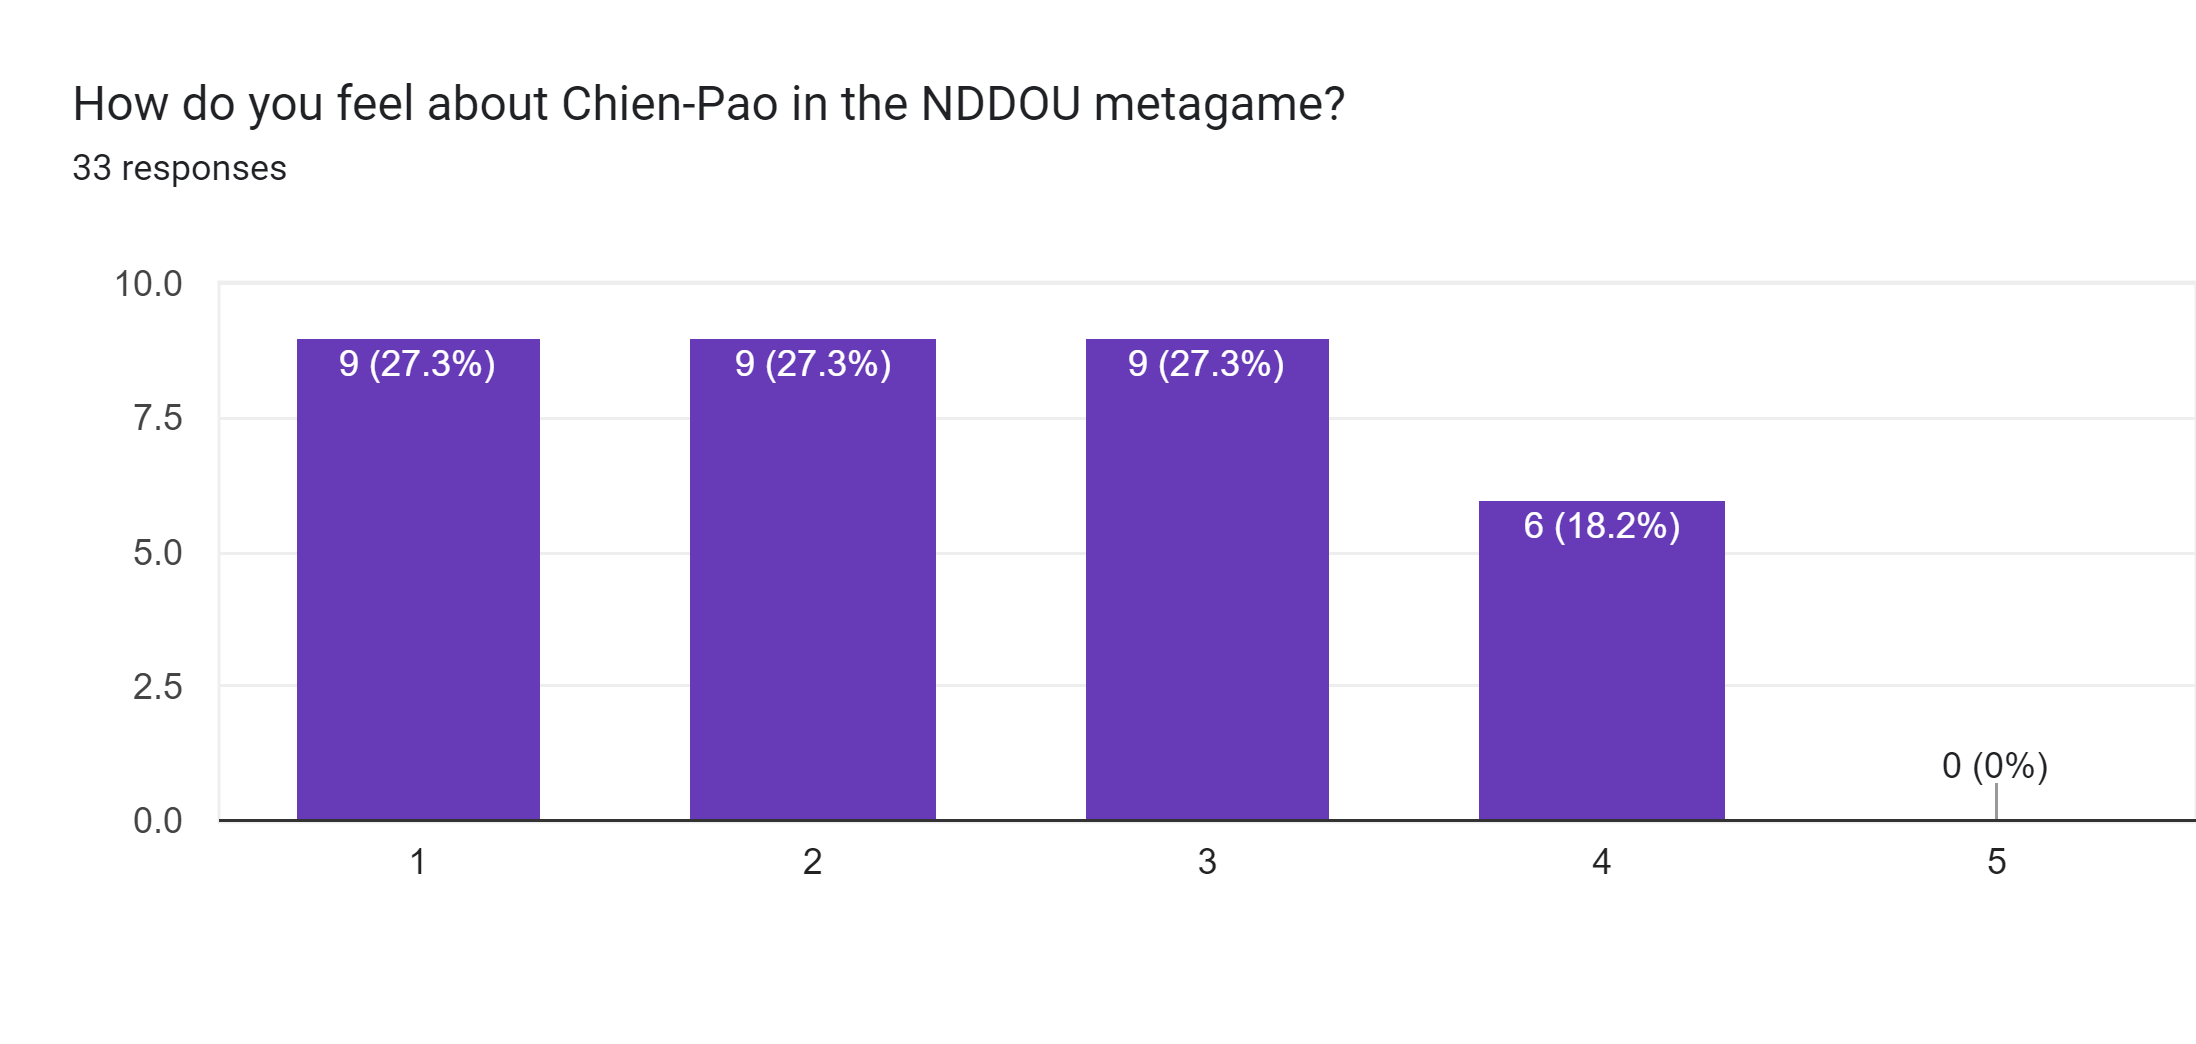 Forms response chart. Question title: How do you feel about Chien-Pao in the NDDOU metagame?. Number of responses: 33 responses.